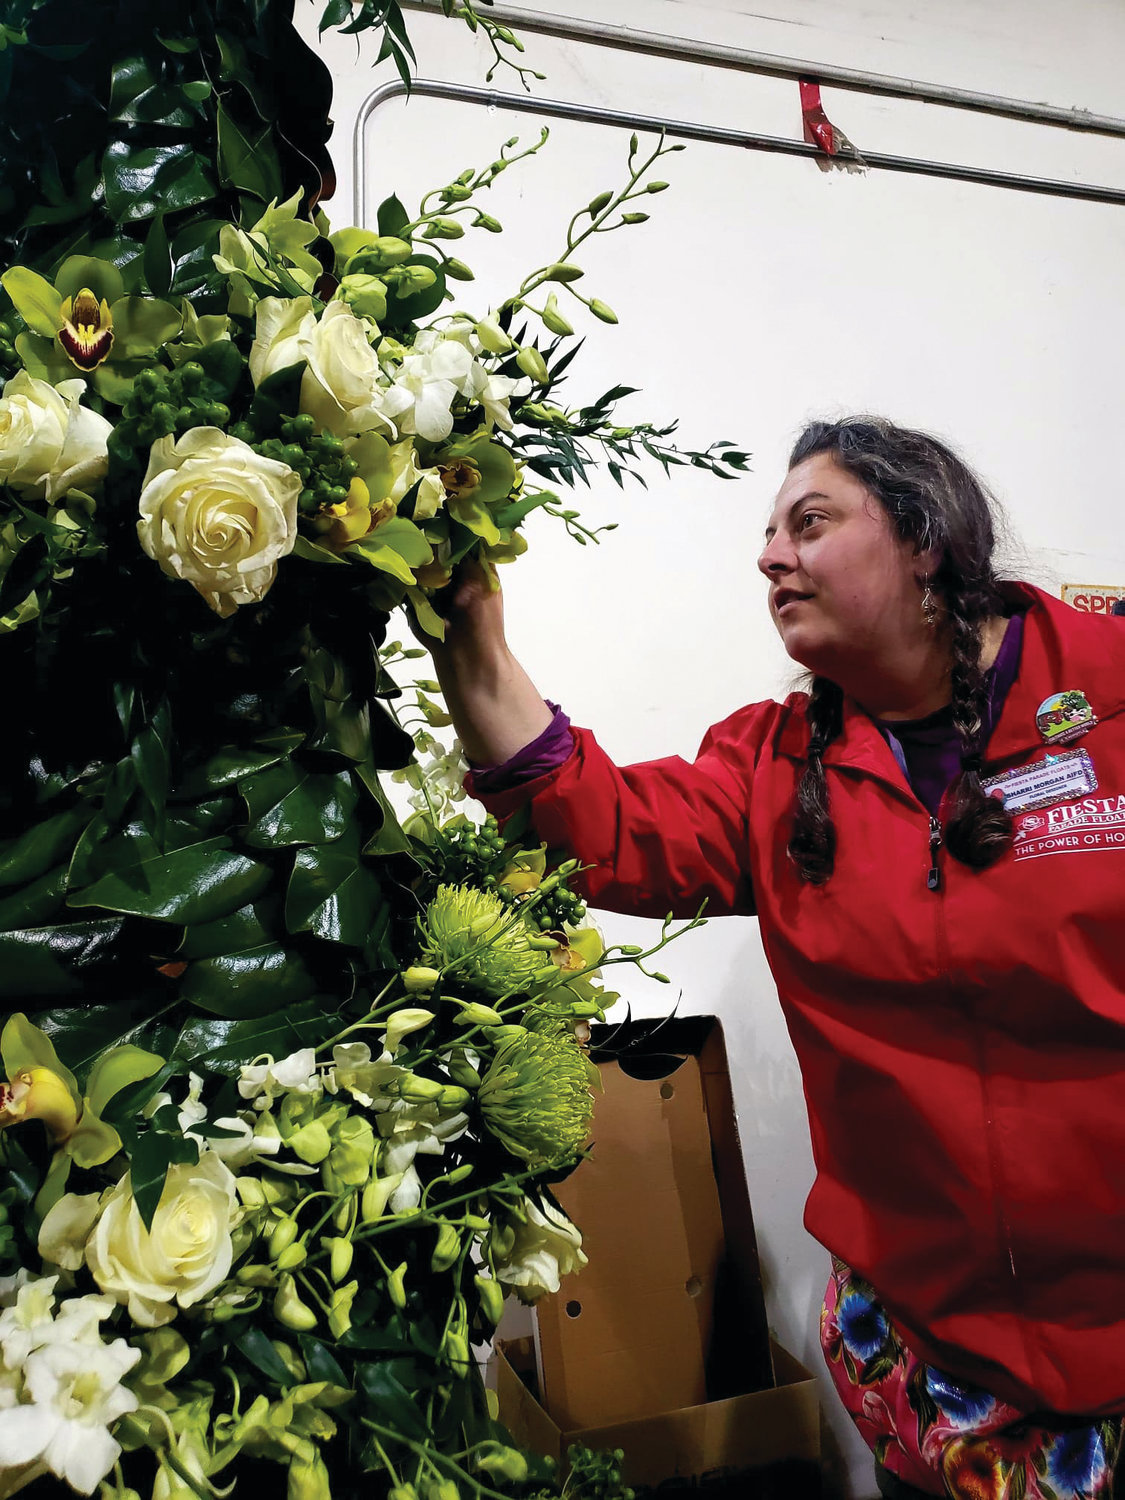 Sharrai Morgan inspects the floral arrangements of the float she and her team worked on non-stop from Dec. 26-31.